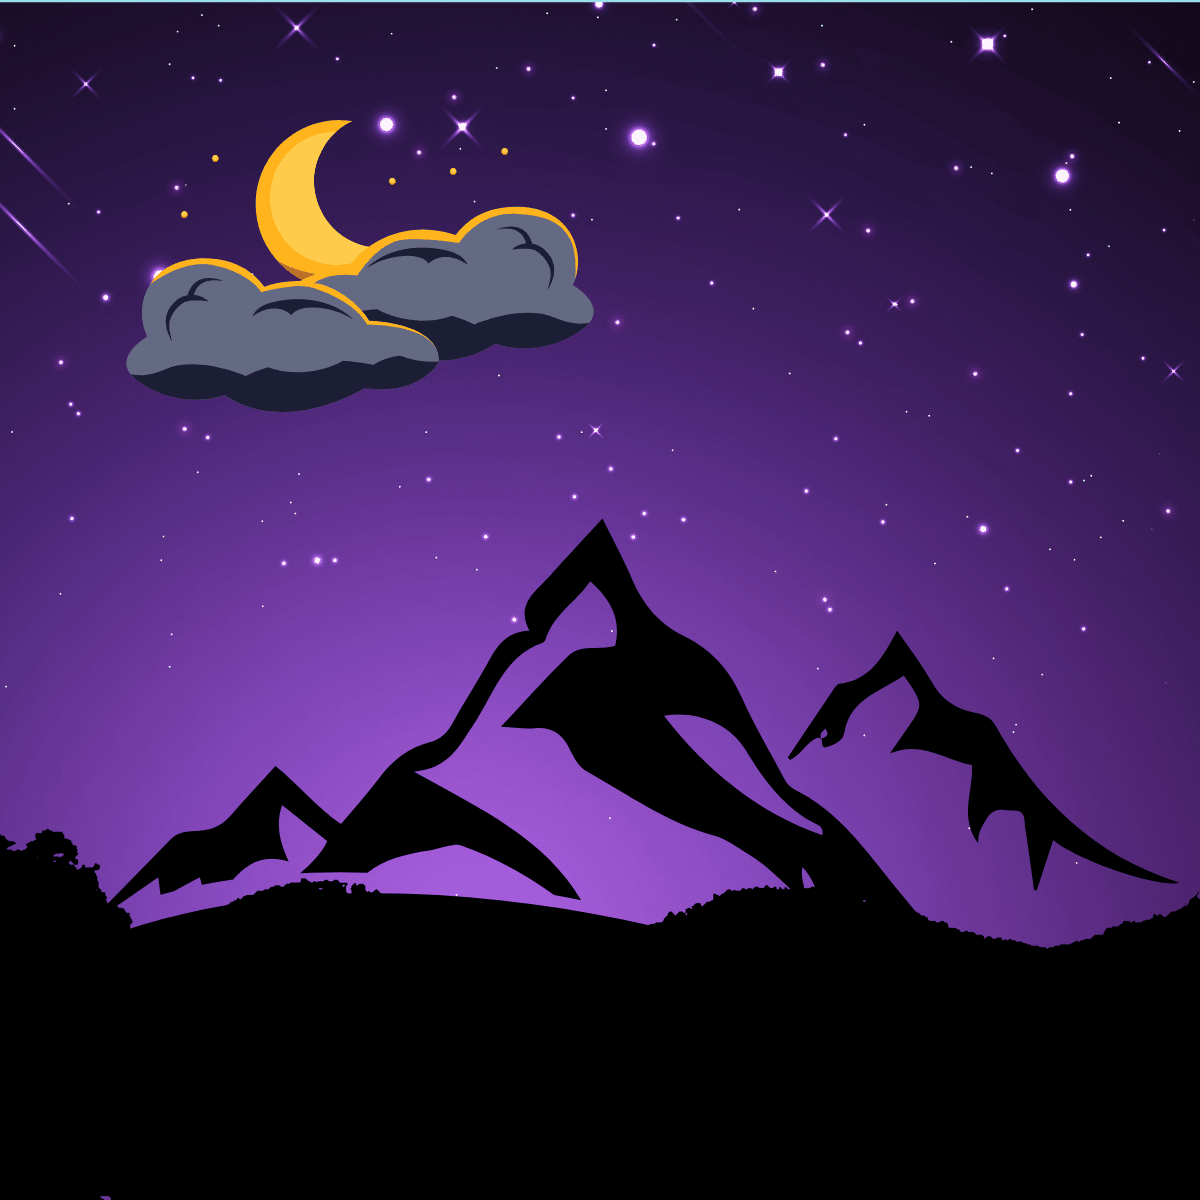 Starry night graphics with the moon